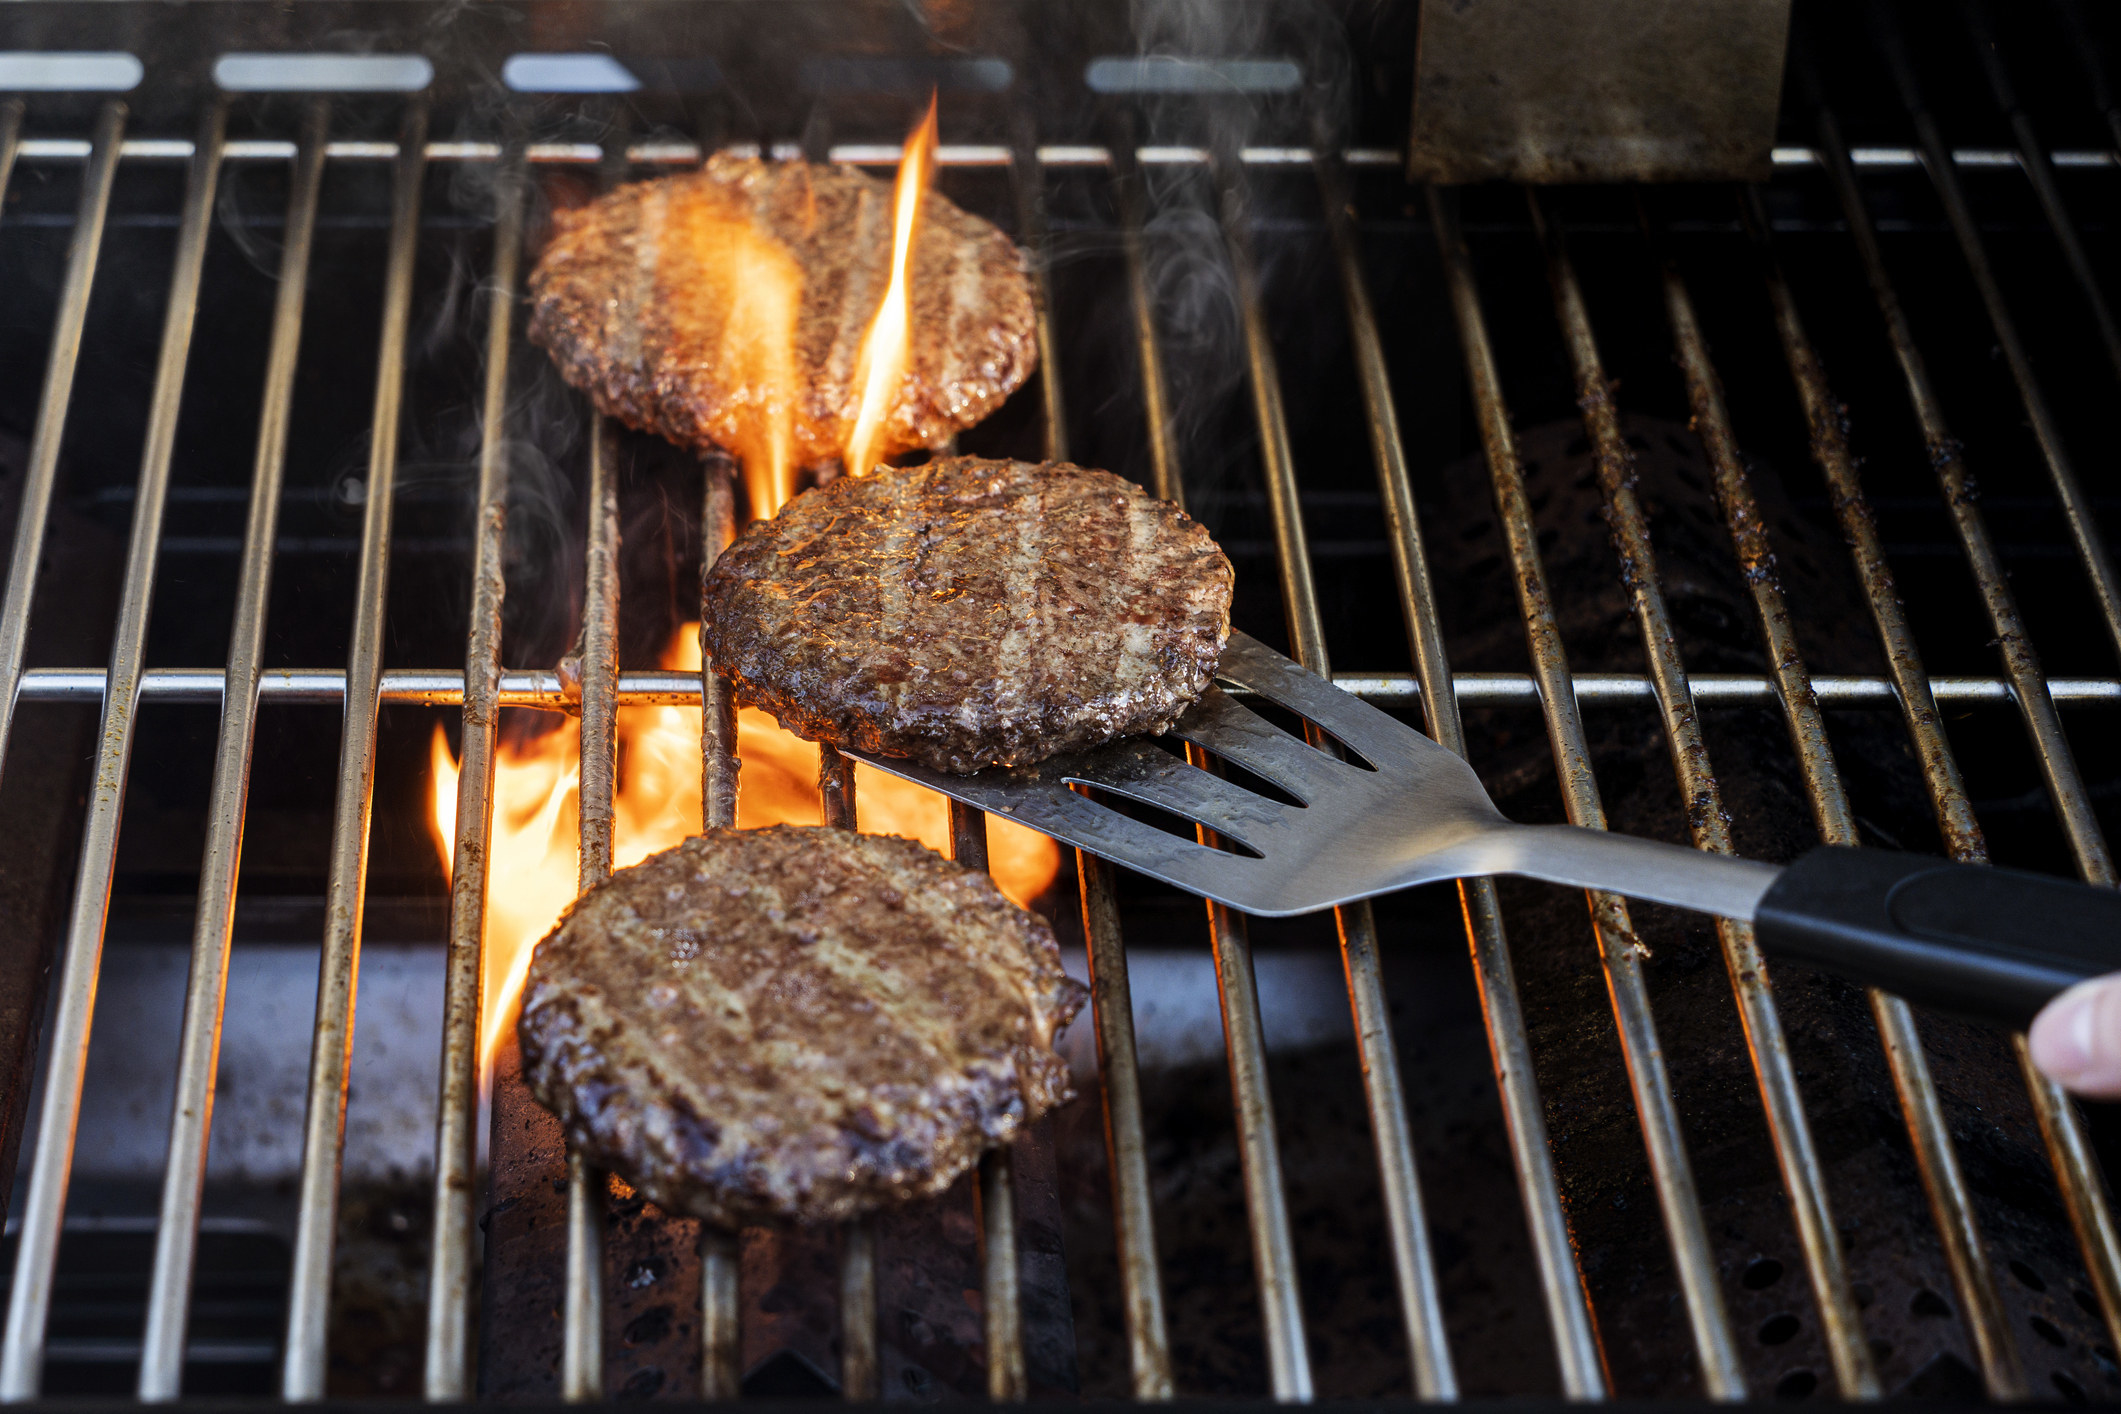 Burgers cook on grill